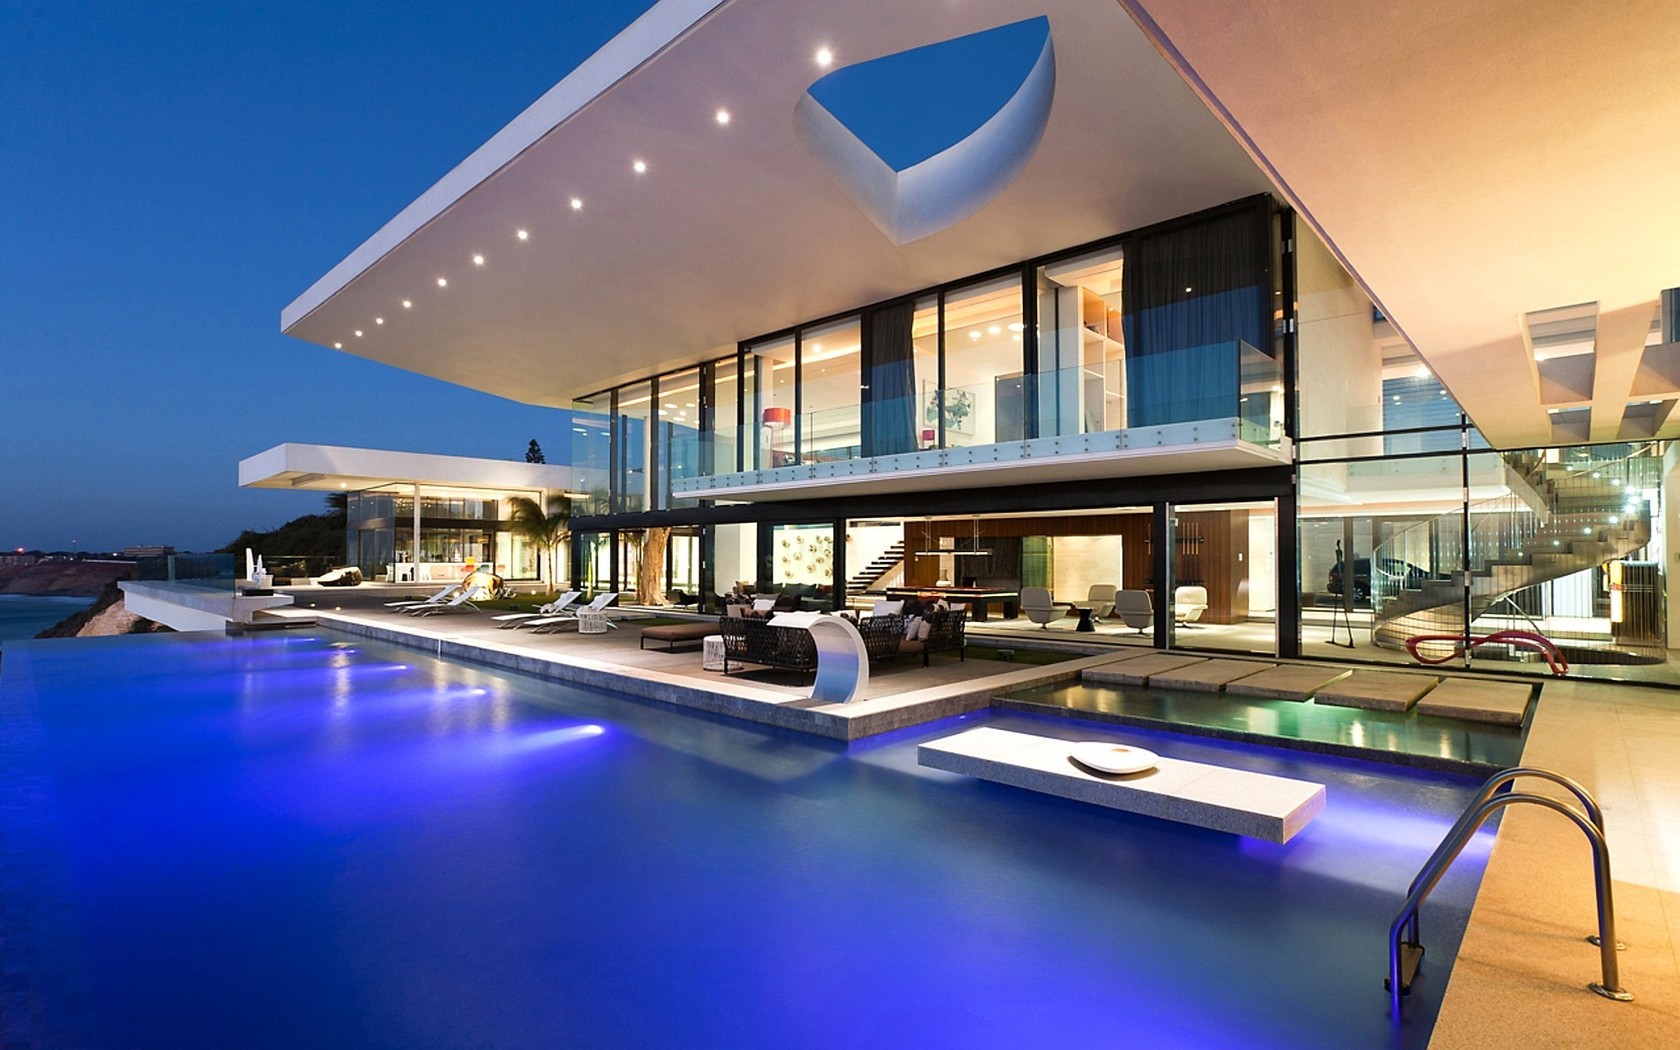 Modern House With A Pool Wallpaper